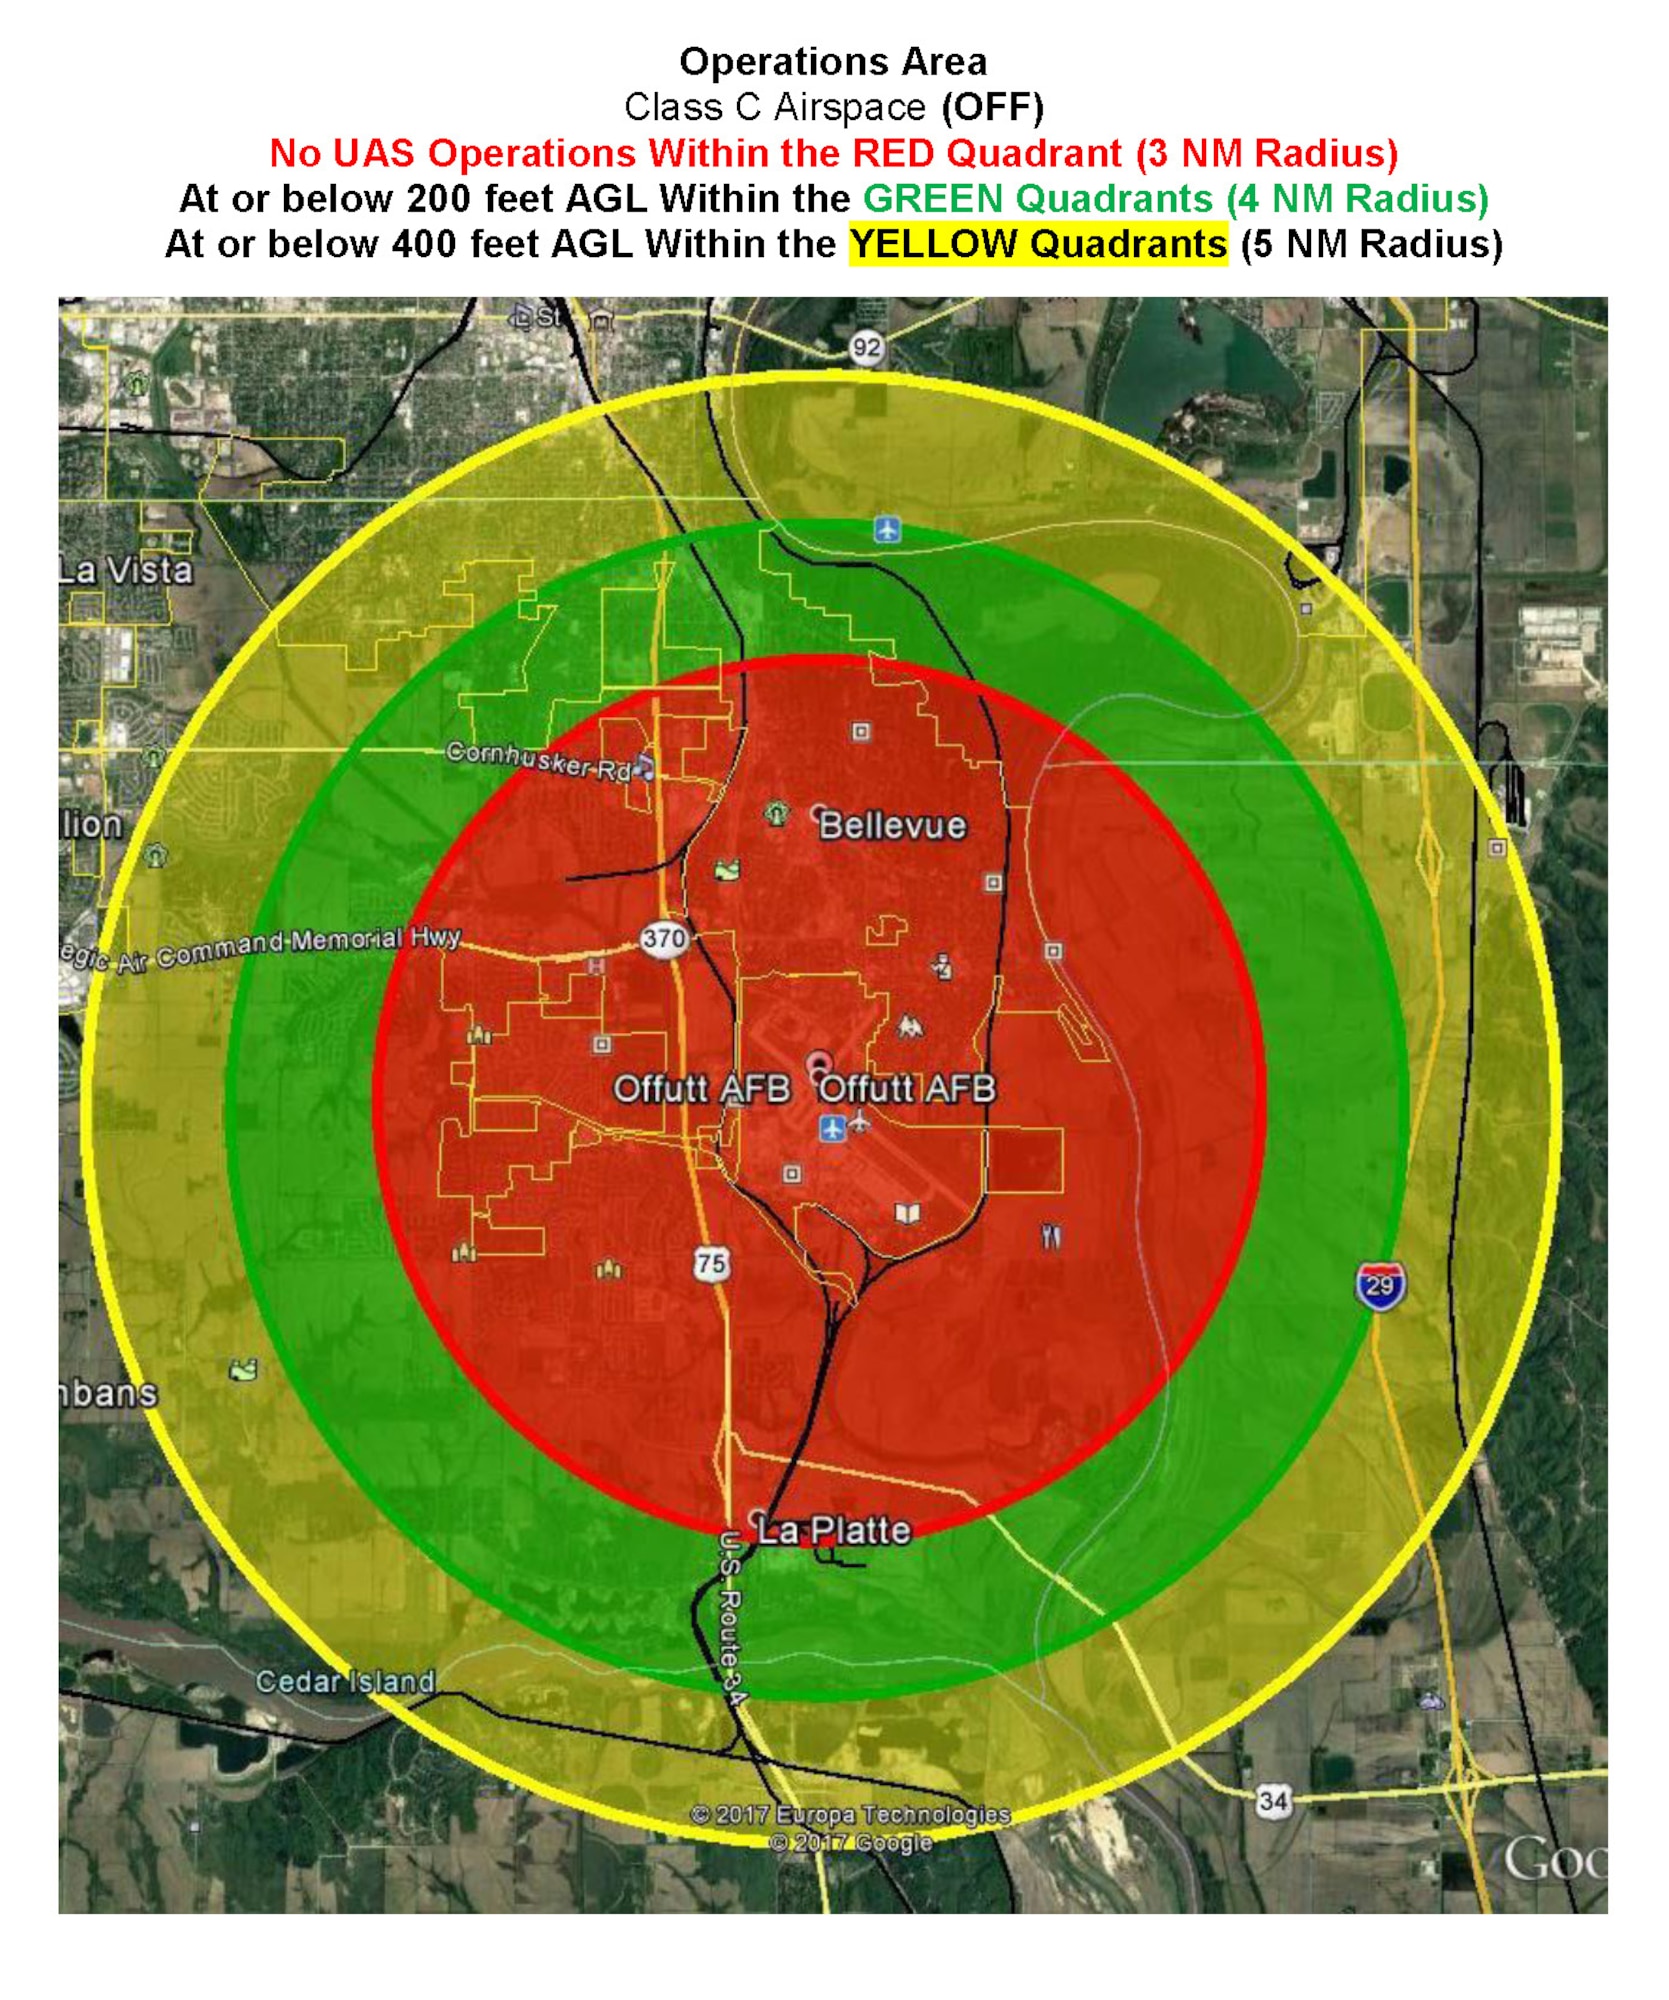 As depicted in the map, owners should note that Offutt main base is designated as Class C airspace, so an FAA waiver must be approved 90 days prior to sUAS utilization. Other zones have restrictions as well, see image for details or visit the Federal Aviation Administration's website.